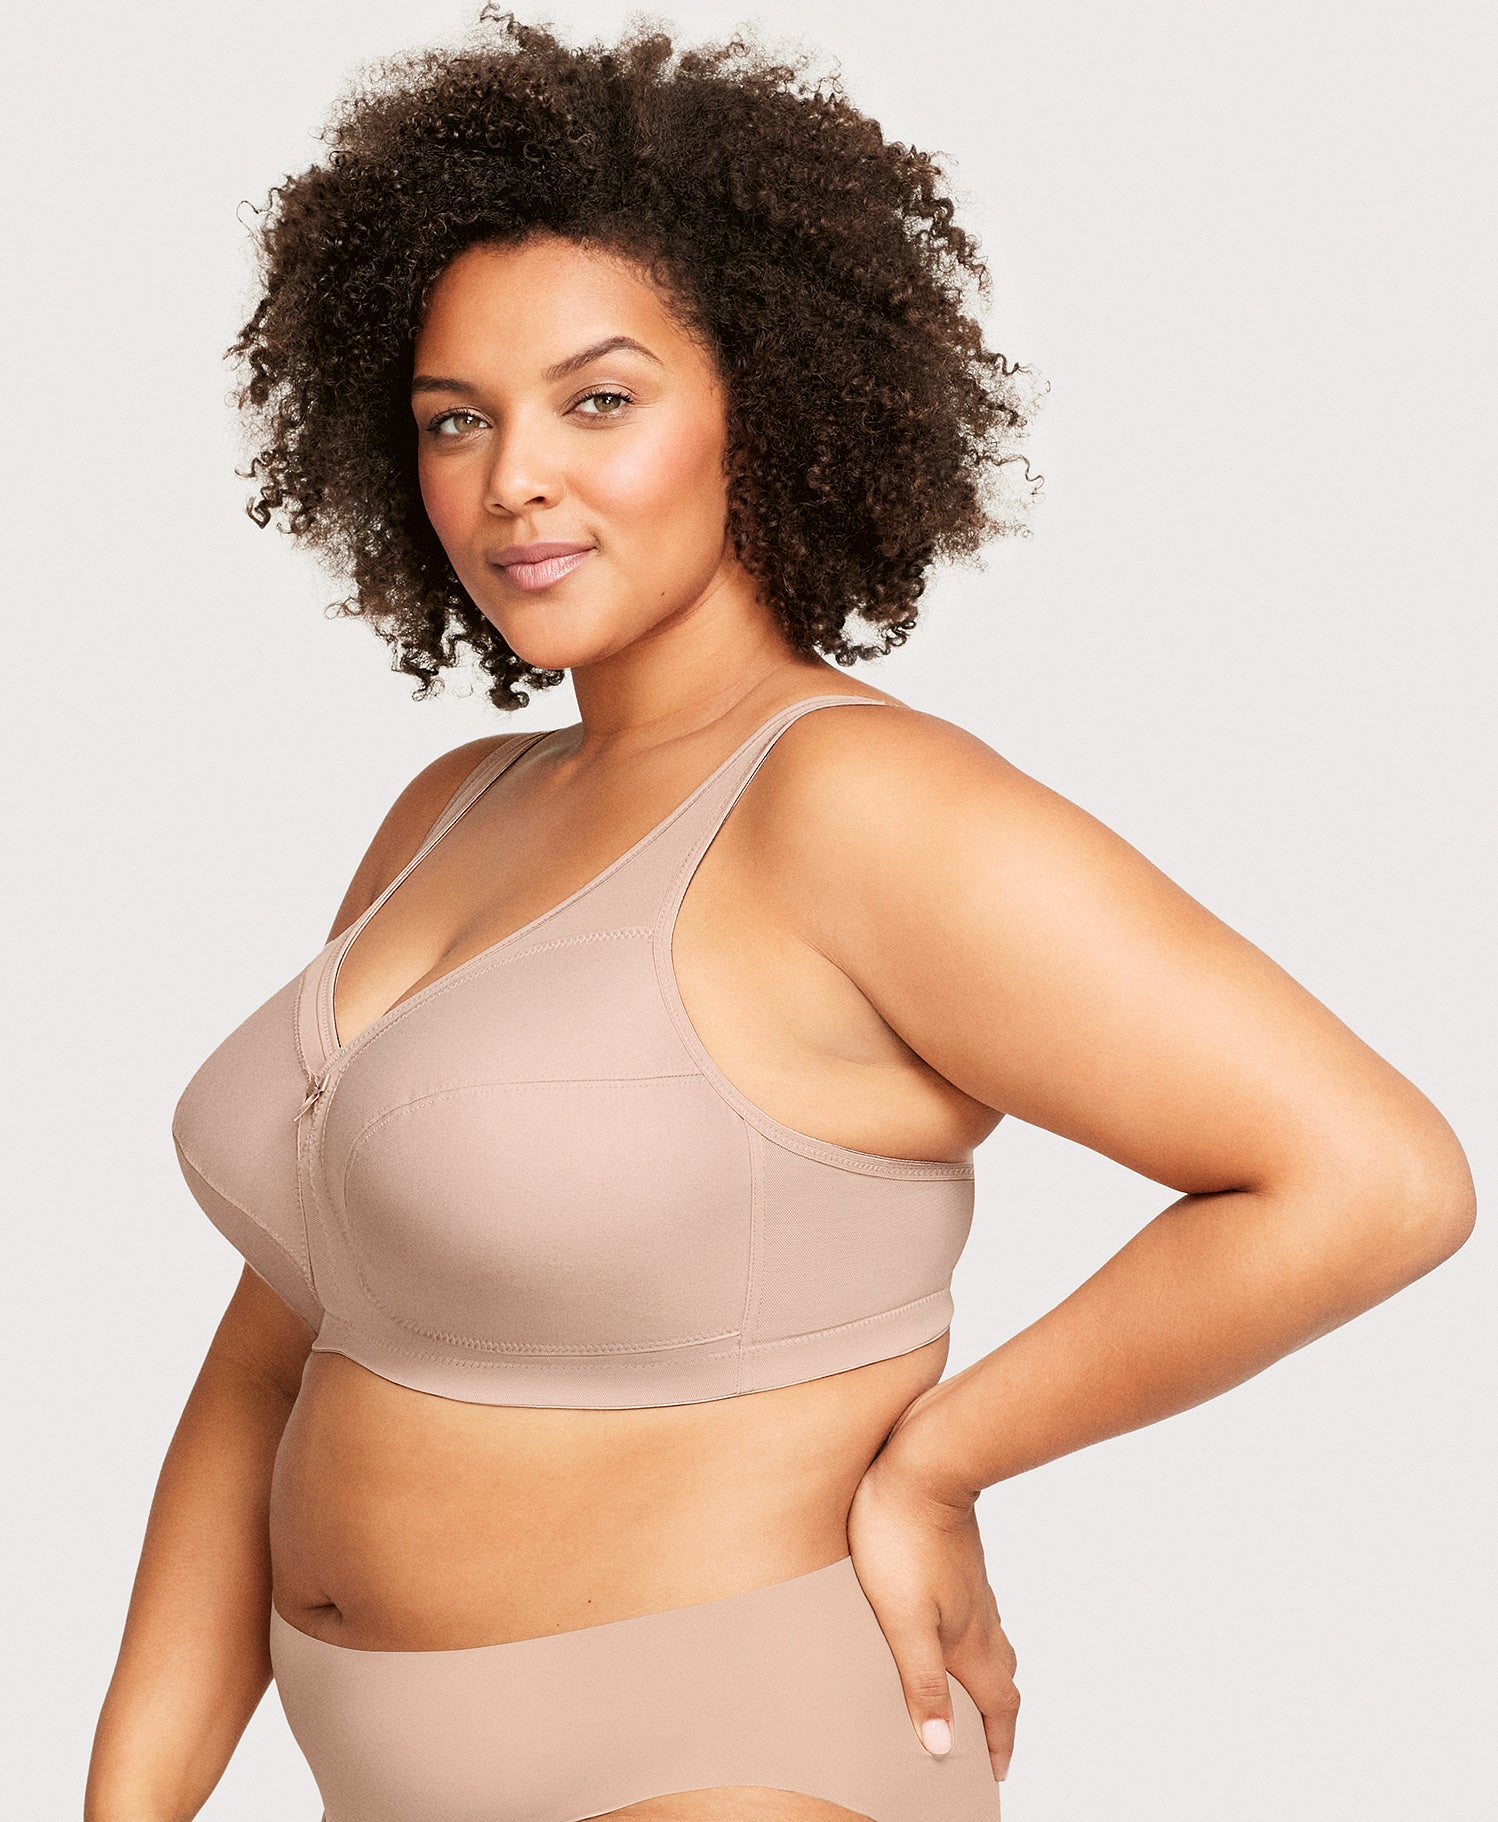 Glamorise Womens Magiclift Cotton Support Wirefree Bra 1001 Café 38i :  Target